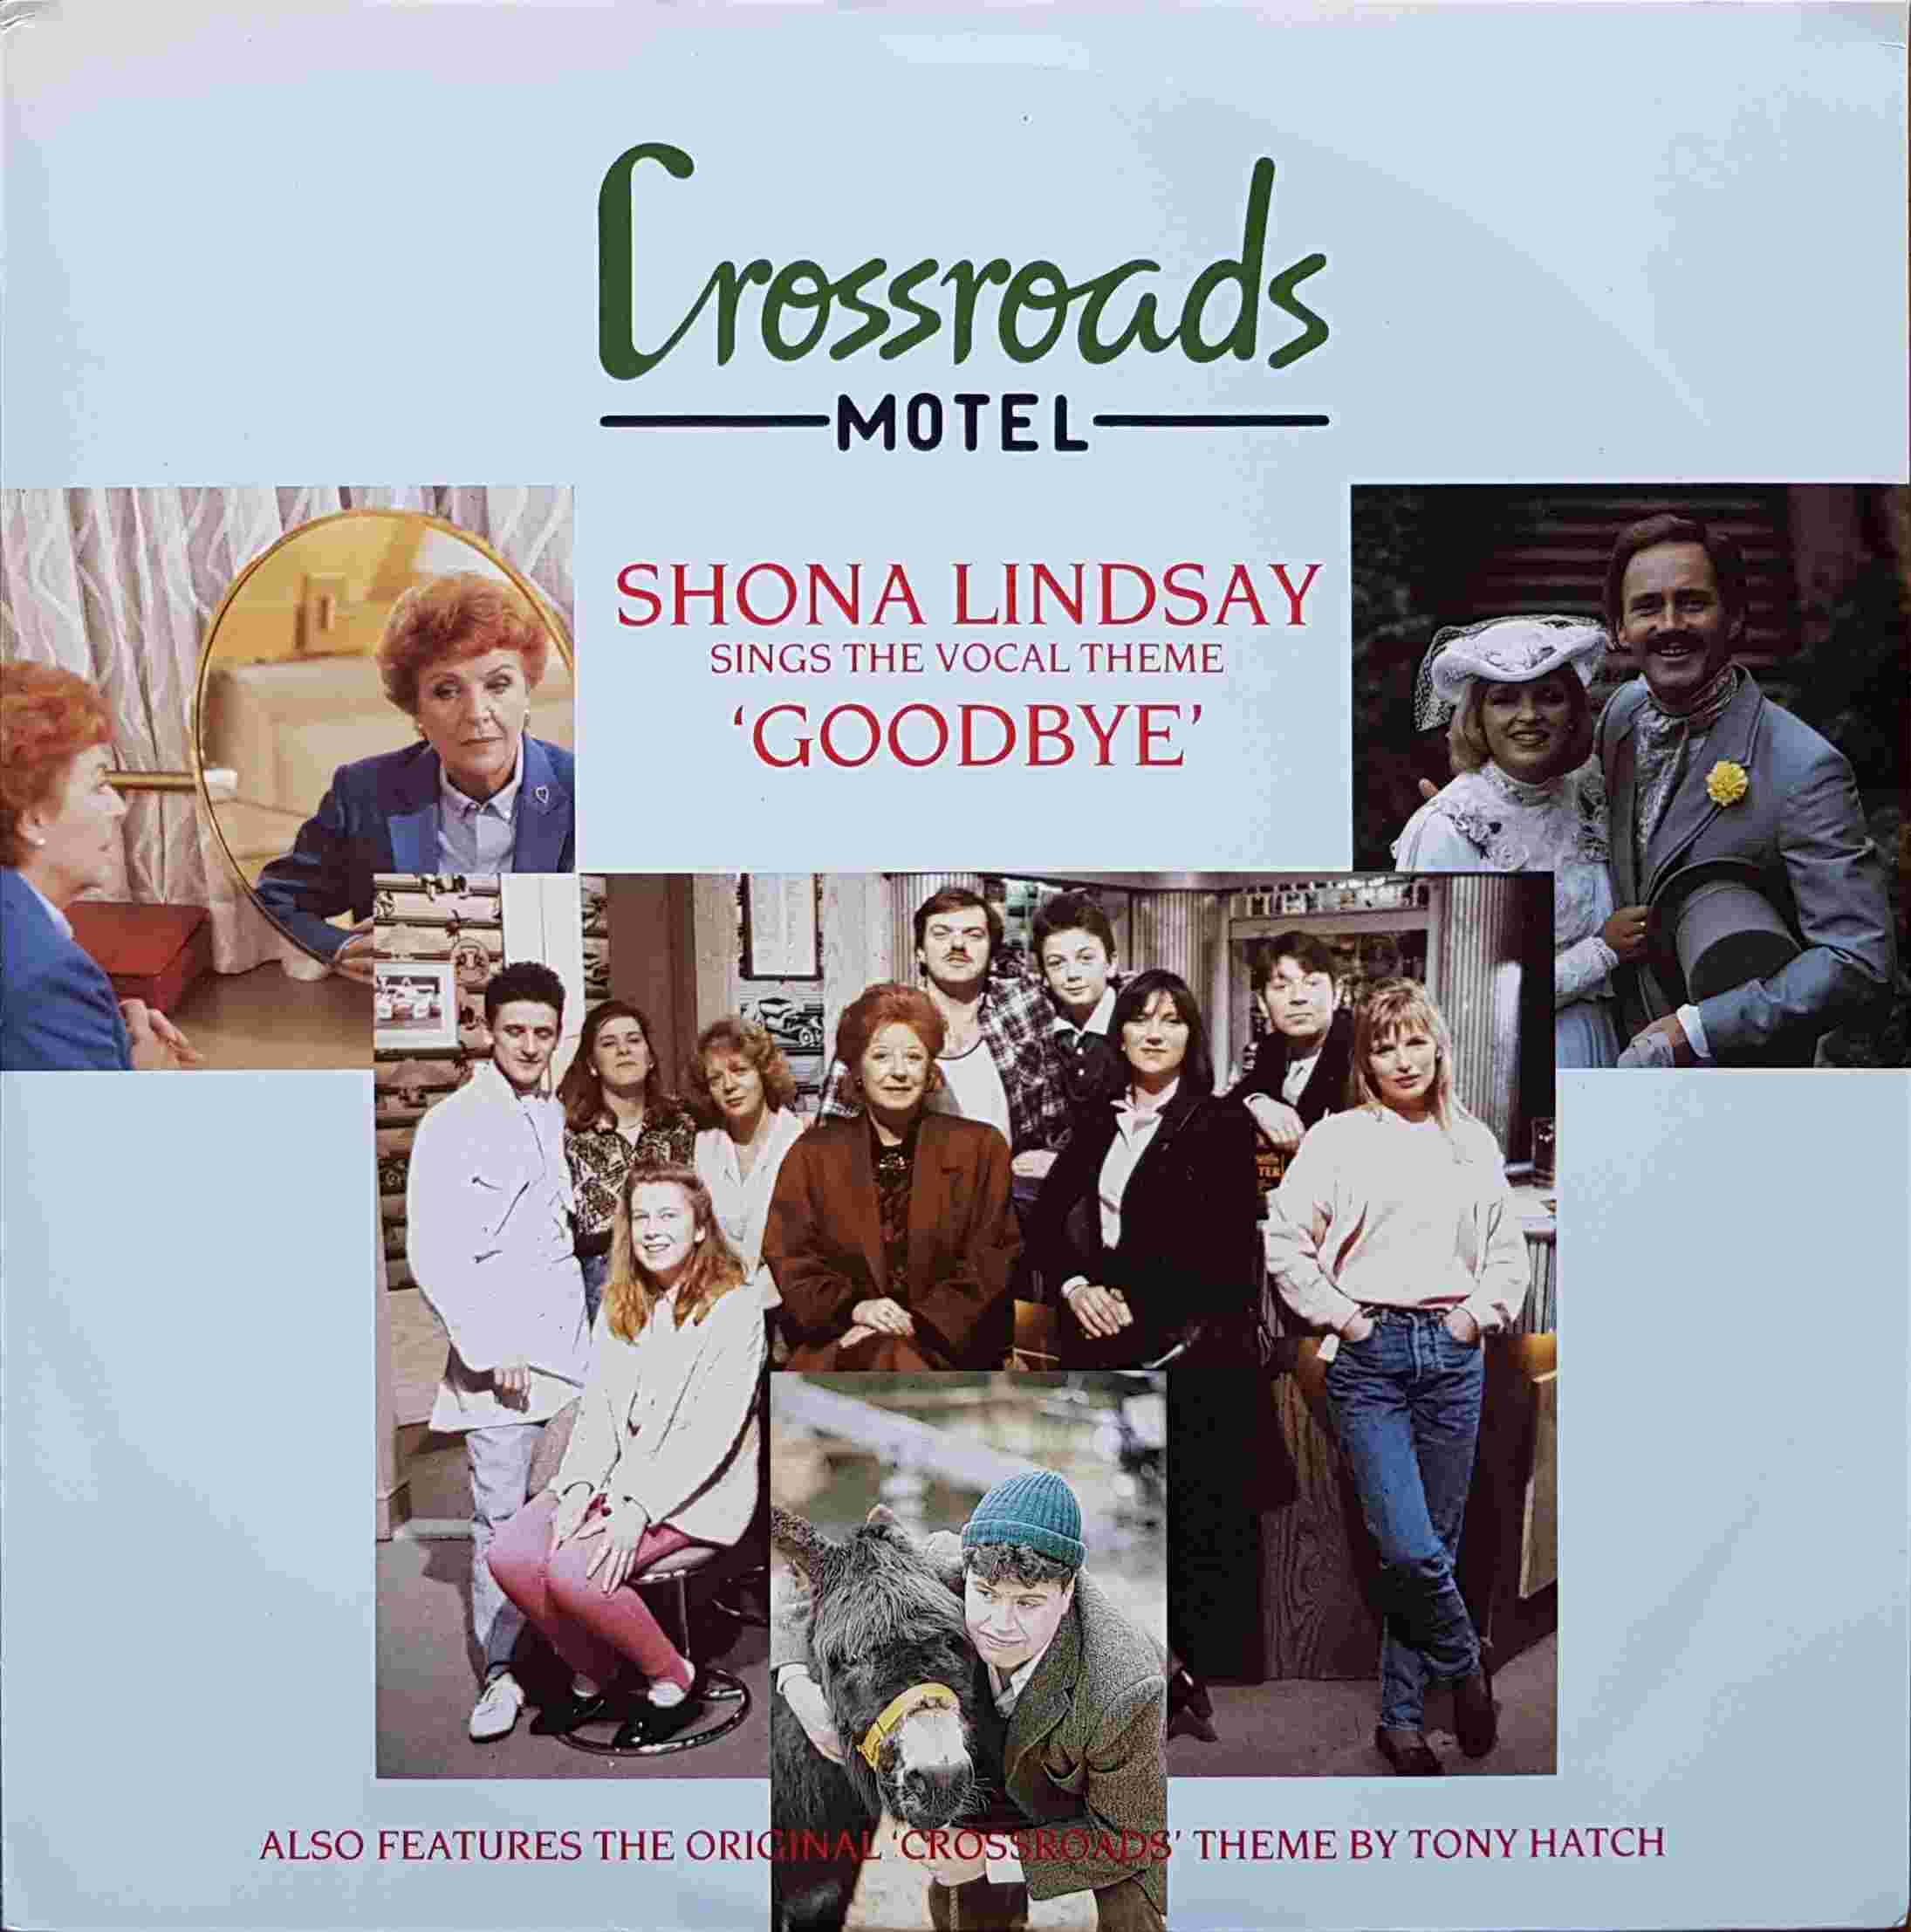 Picture of Crossroads by artist Tony Hatch / Early / Litman from ITV, Channel 4 and Channel 5 12inches library